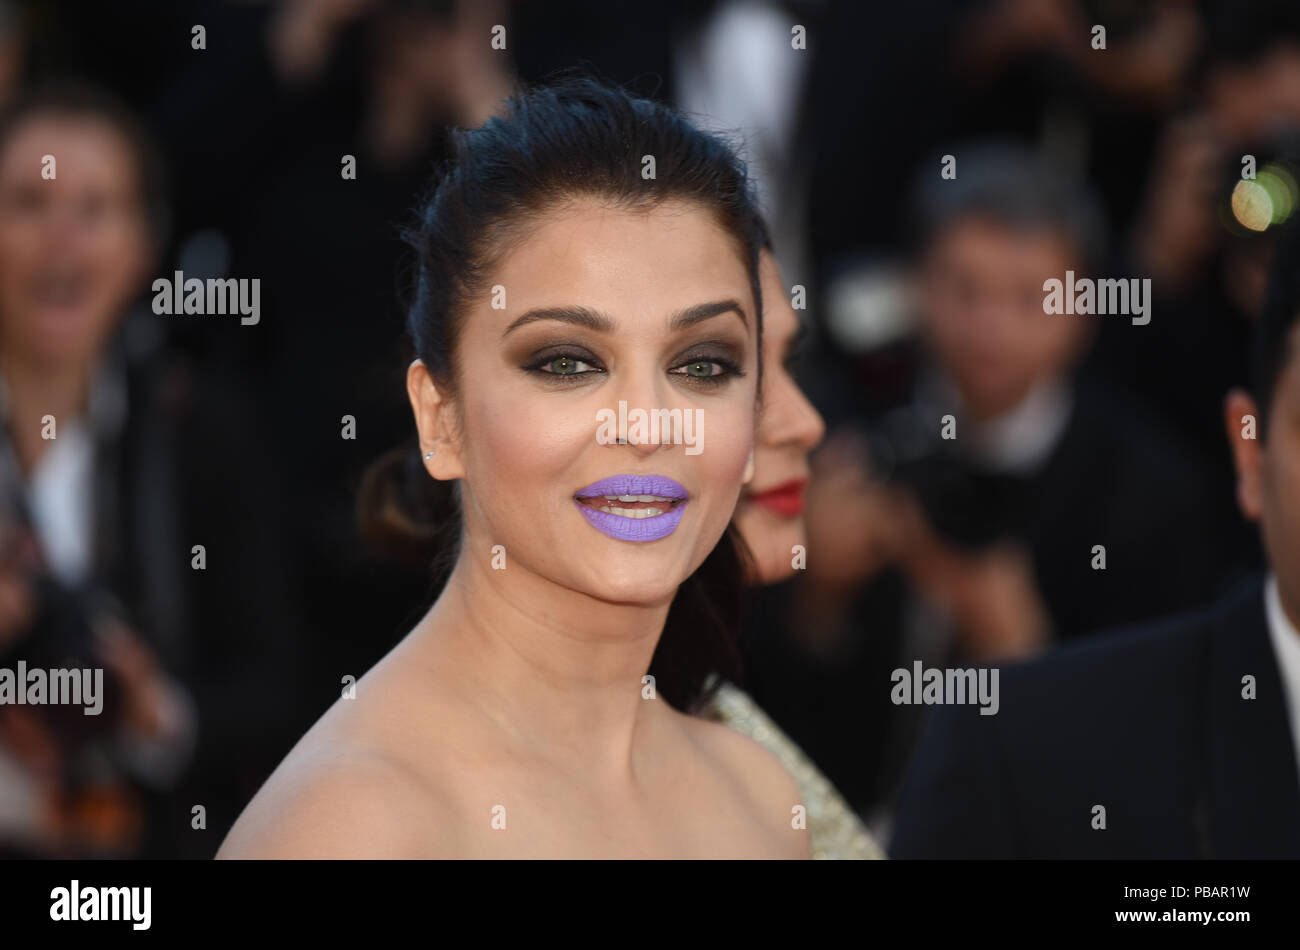 May 15, 2016 - Cannes, France: Aishwarya Rai attends the 'Mal de Pierres' premiere during the 69th Cannes film festival.  Aishwarya Rai lors du 69eme Festival de Cannes. *** FRANCE OUT / NO SALES TO FRENCH MEDIA *** Stock Photo